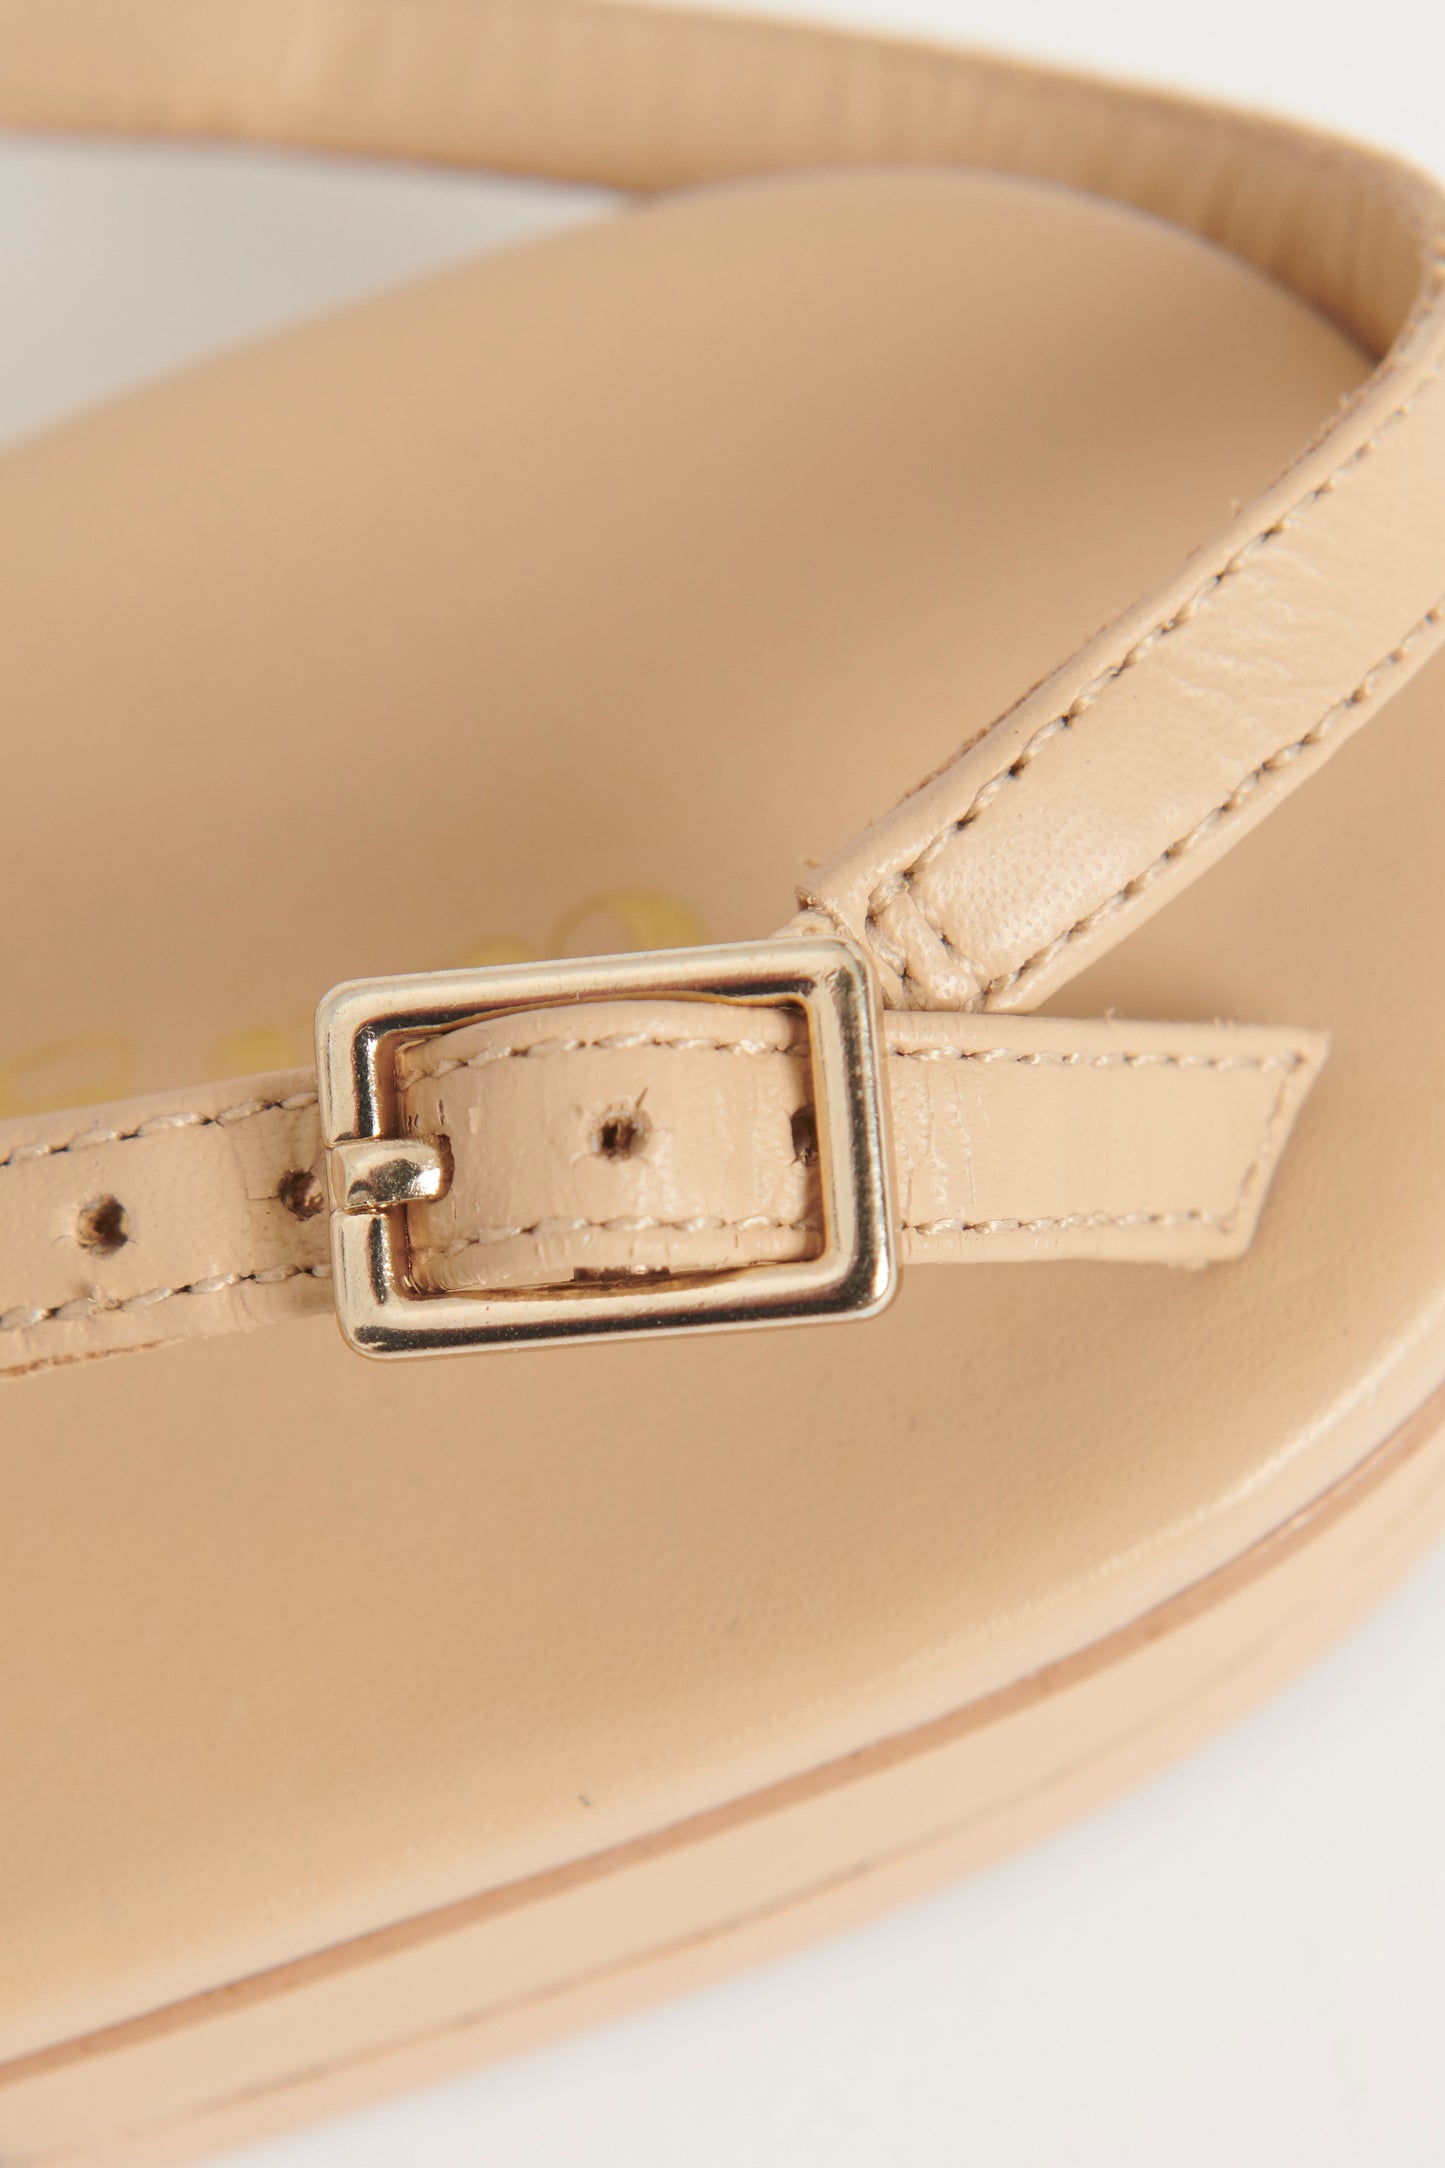 Nude T-Bar Preowned Sandals